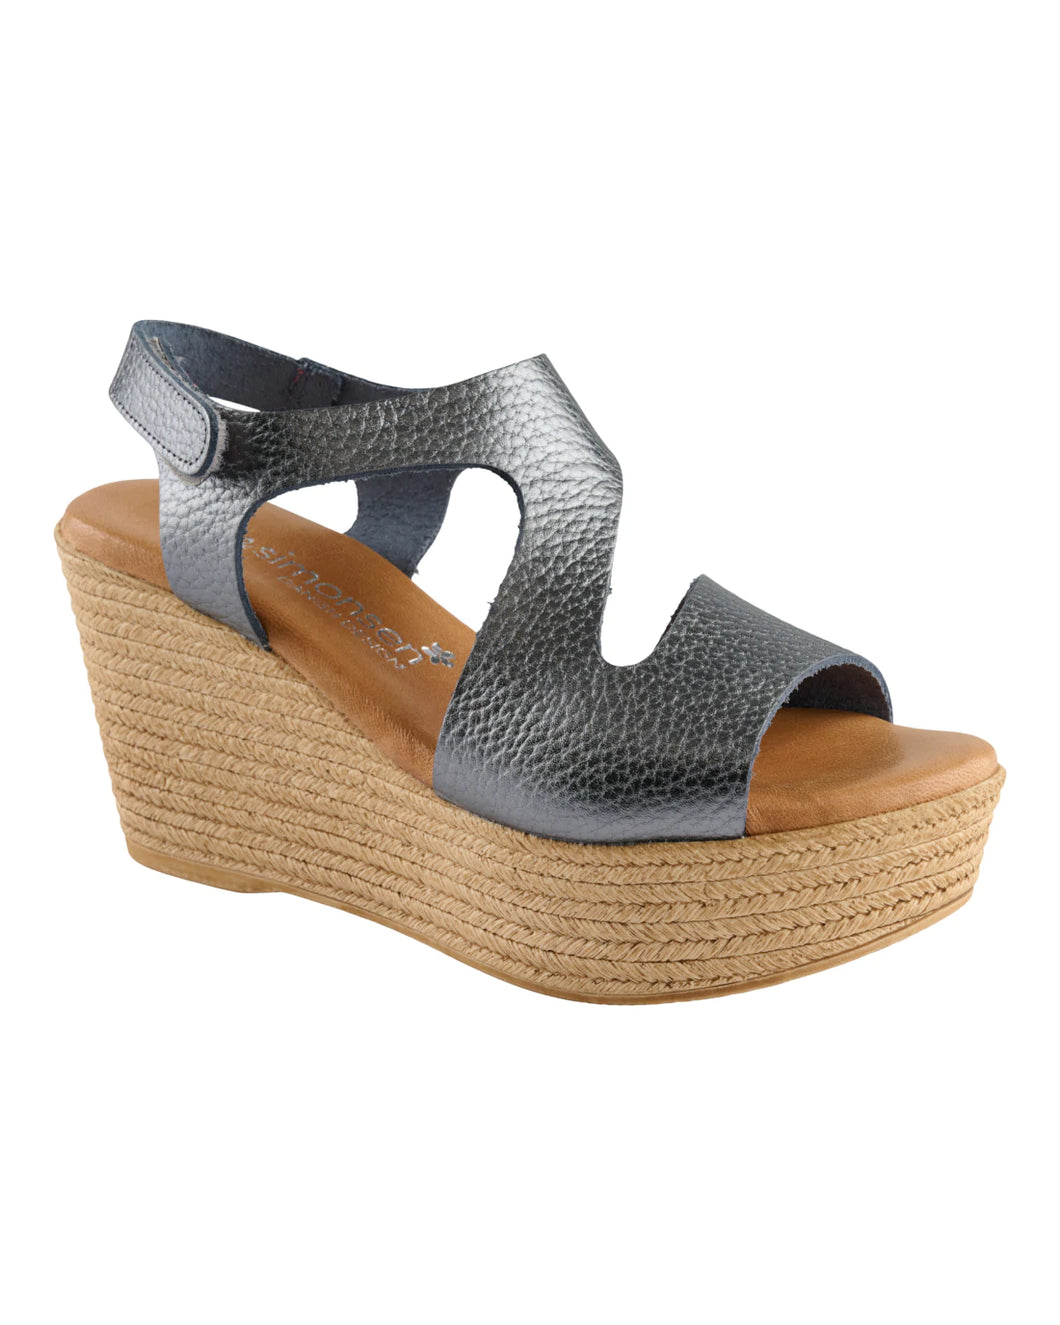 Leather Wedge Sandal - Pewter